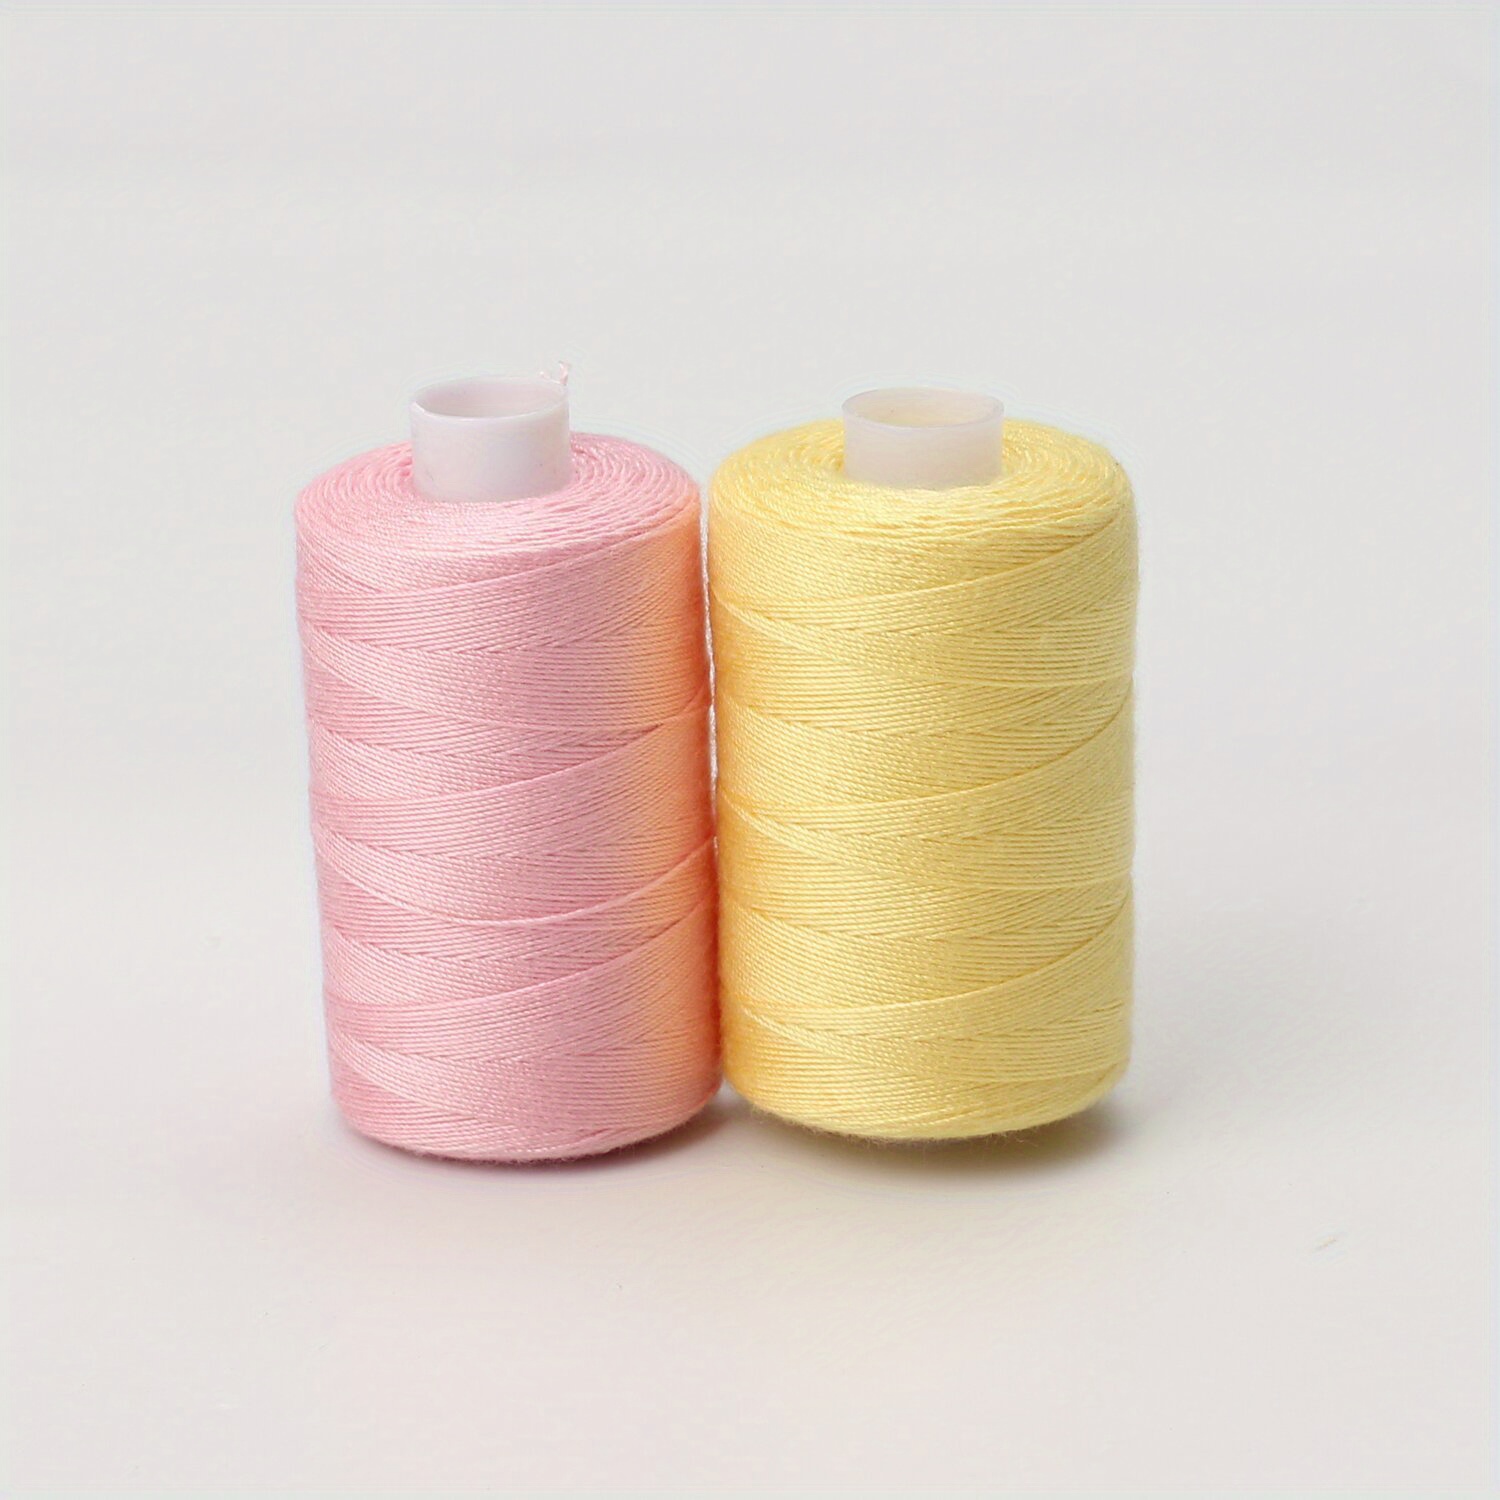 Polyester Threads Machine Sewing, Polyester Sewing Accessories